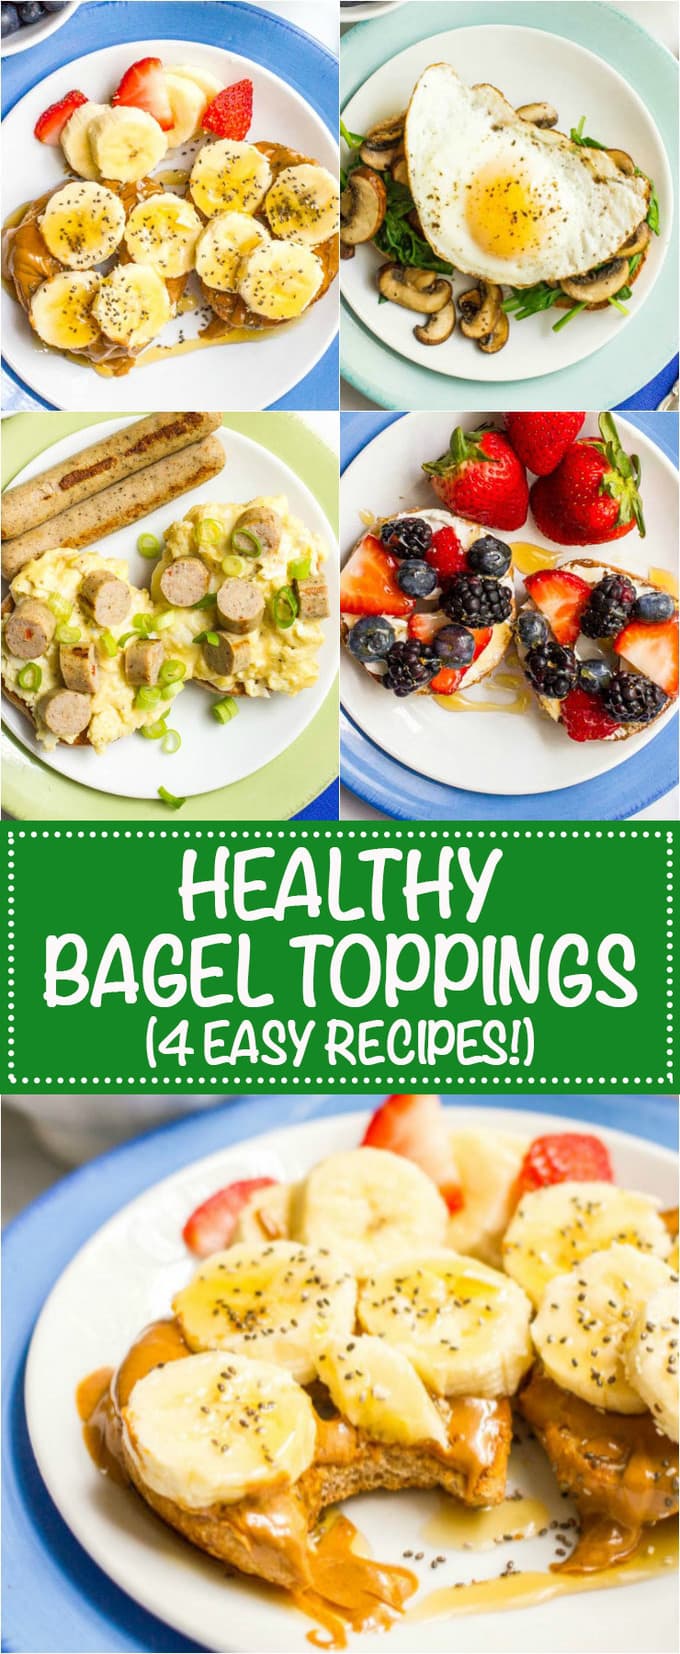 Healthy bagel toppings, 4 ways - two sweet and two savory - for a whole lot of breakfast time deliciousness! | www.familyfoodonthetable.com